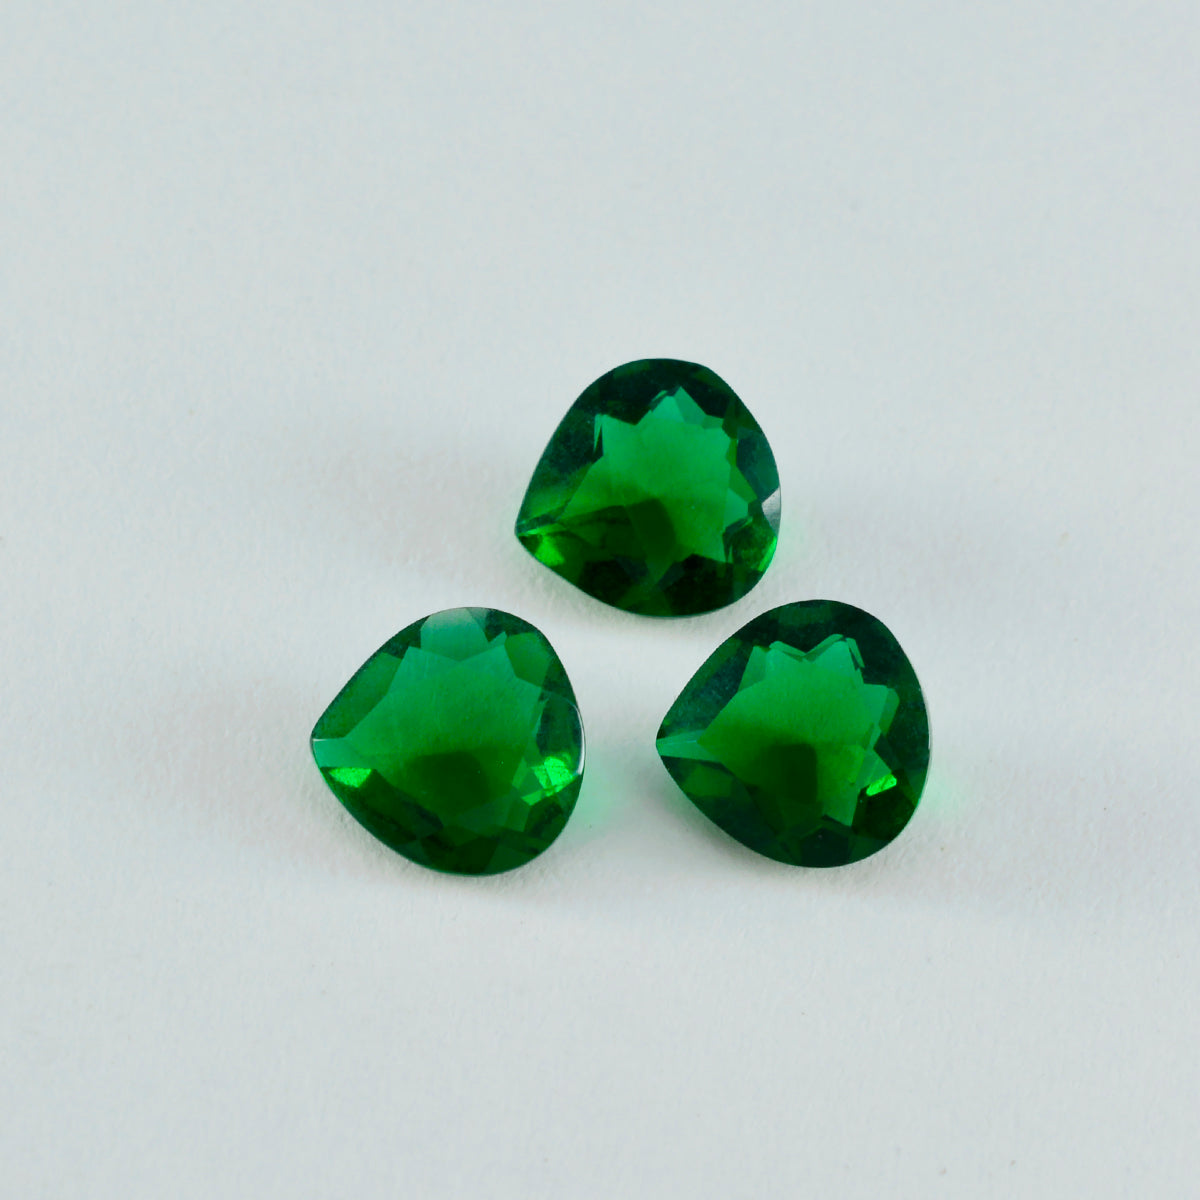 Riyogems 1PC Green Emerald CZ Faceted 8x8 mm Heart Shape handsome Quality Stone